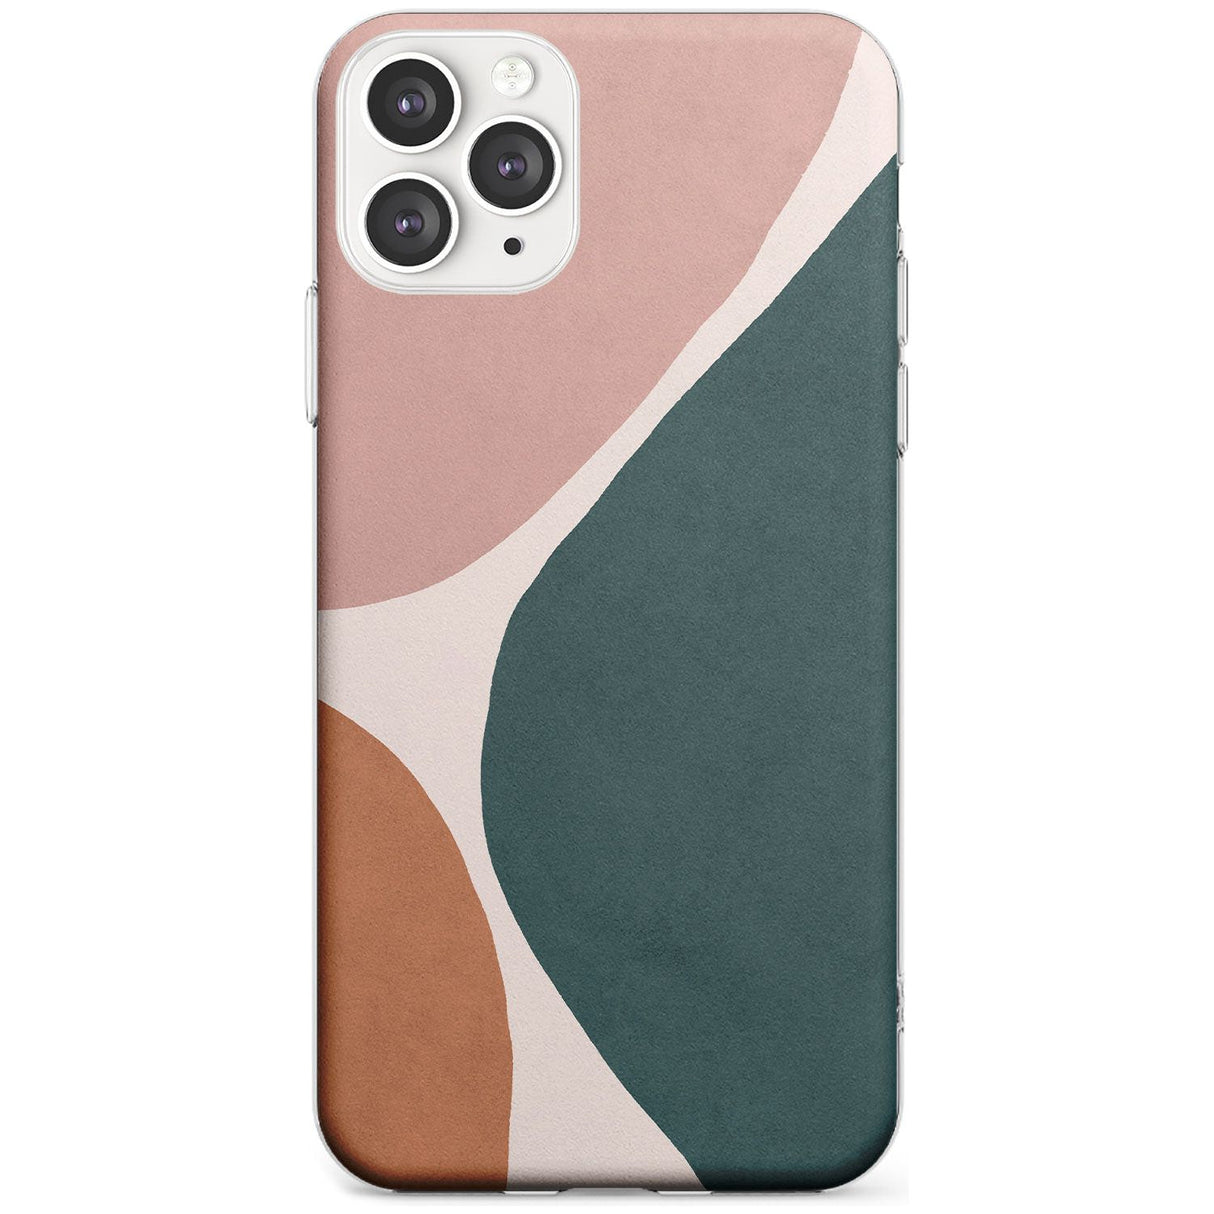 Lush Abstract Watercolour Design #8 Phone Case iPhone 11 Pro Max / Clear Case,iPhone 11 Pro / Clear Case,iPhone 12 Pro Max / Clear Case,iPhone 12 Pro / Clear Case Blanc Space